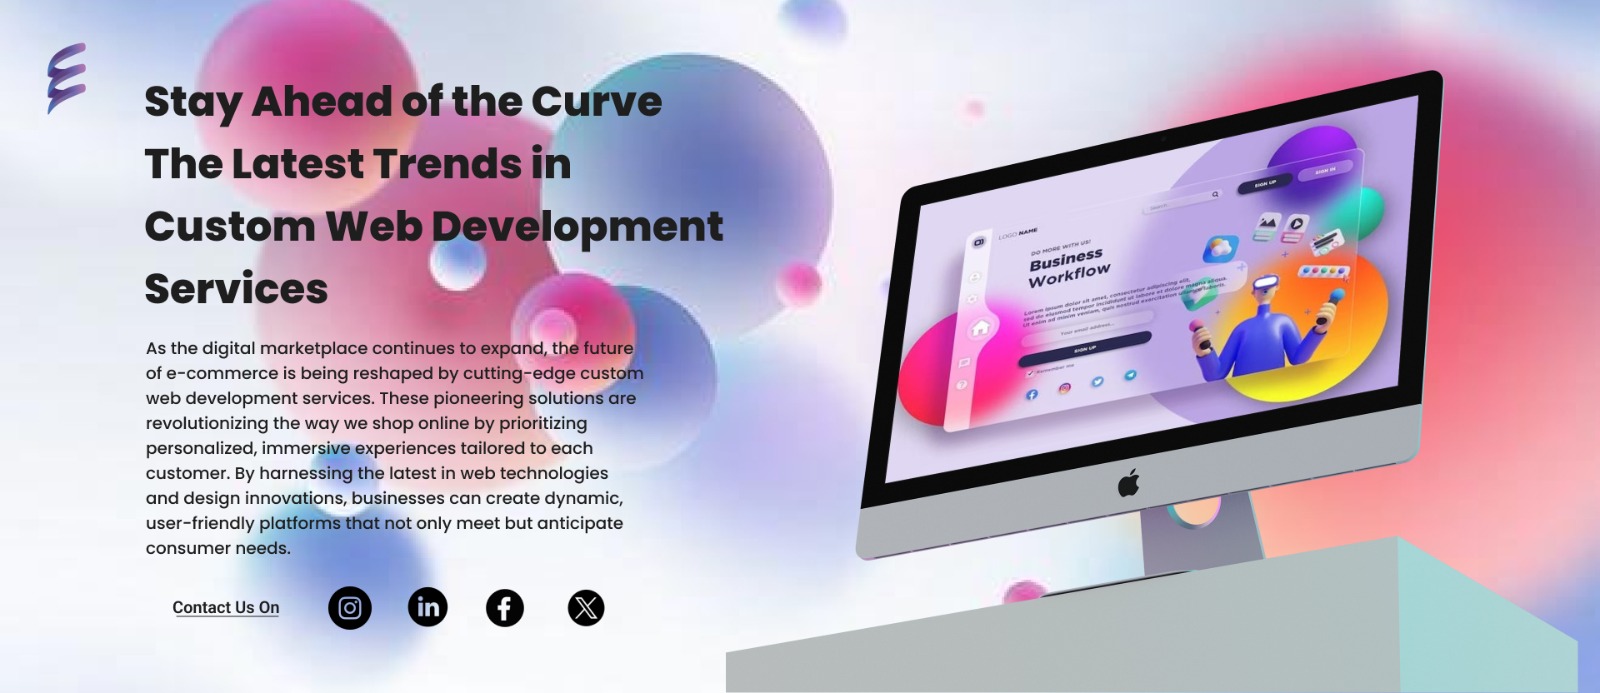 Stay Ahead of the Curve The Latest Trends in Custom Web Development Services